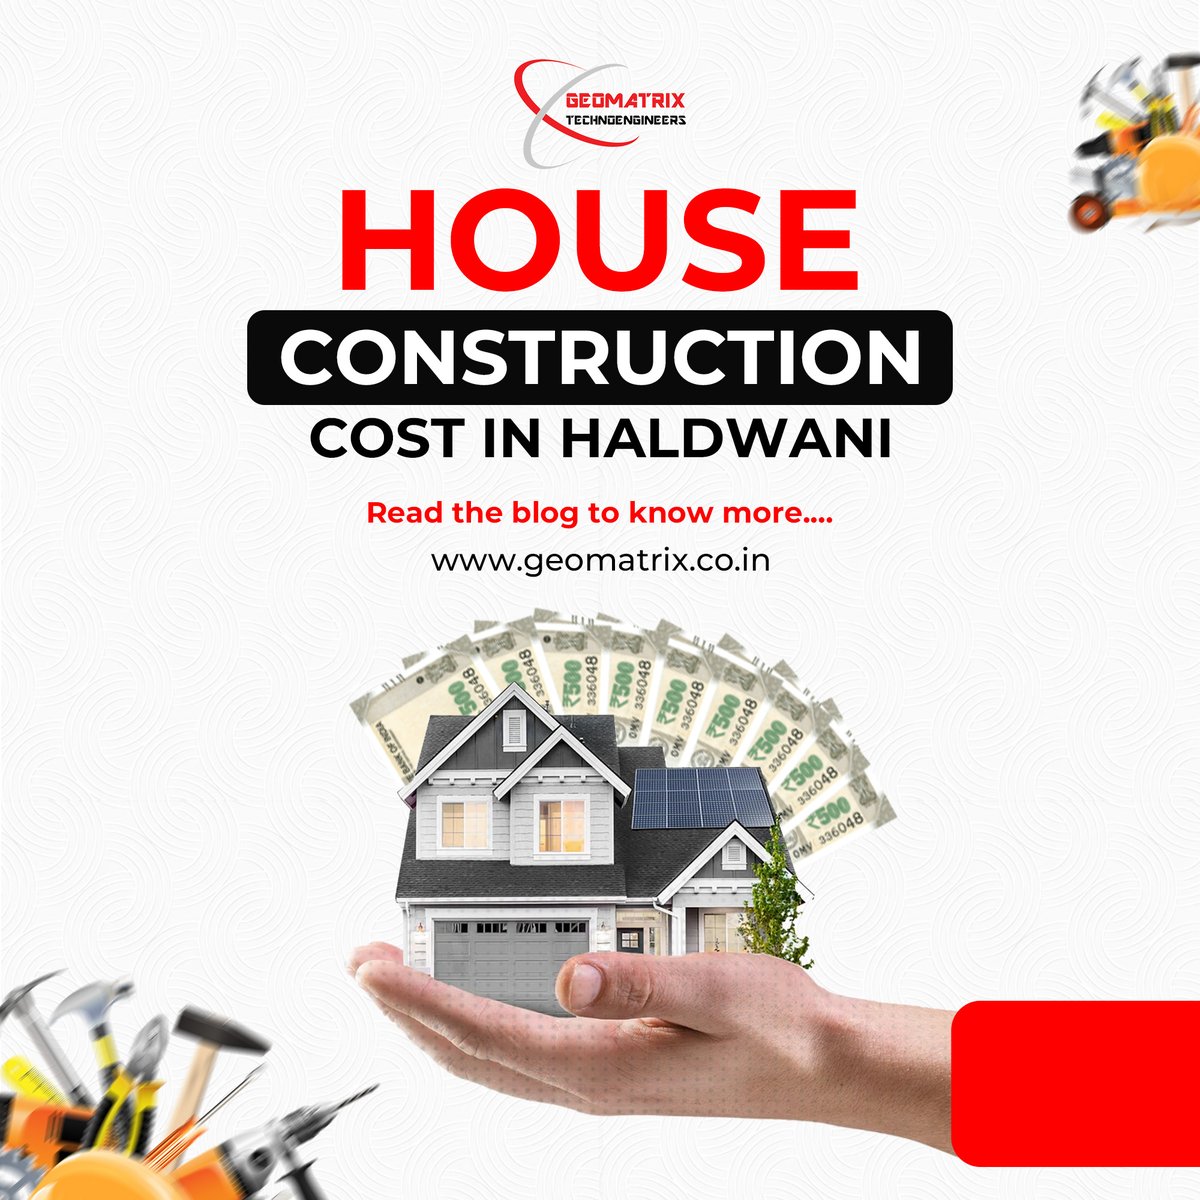 Curious about the cost of #building a home in #Haldwani?
 
Check it out here: geomatrix.co.in/house-construc… 

Explore our site to know more : geomatrix.co.in 

💌vineet.tripathi@geomatrix.co.in
📞999-774-7214

#houseconstruction #constructioncostinhaldwani #haldwani